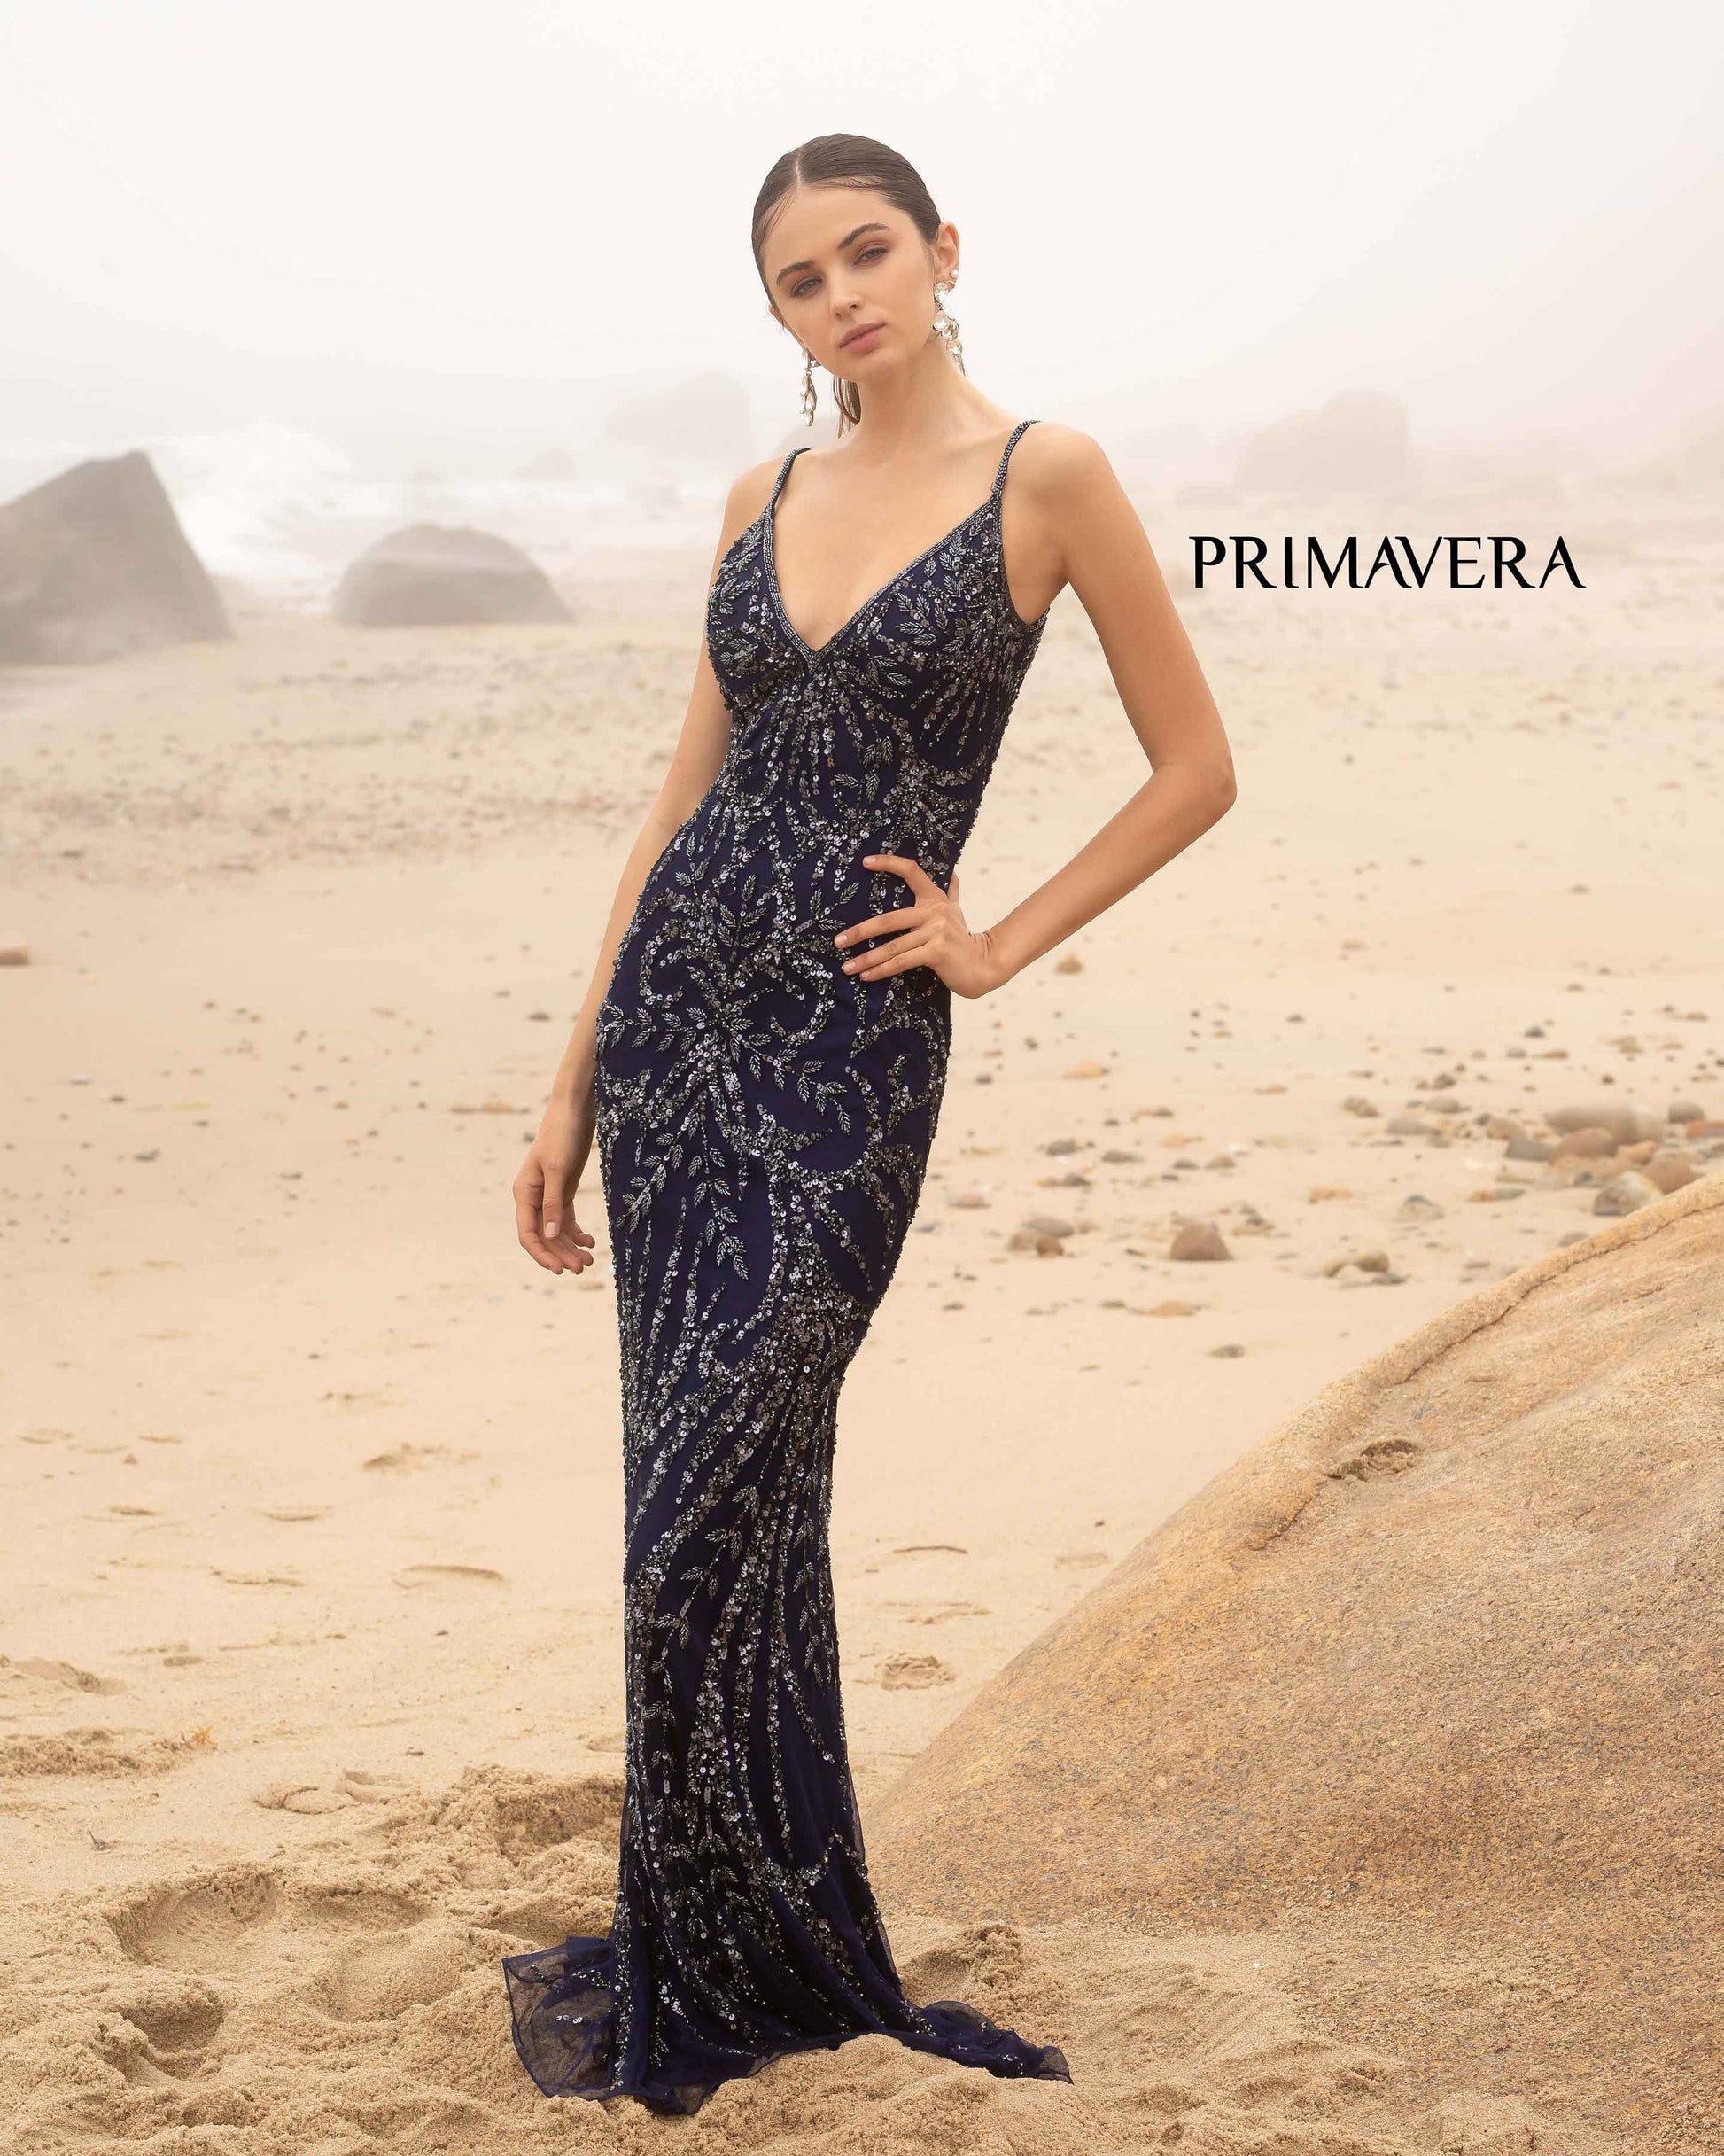 Primavera Couture 3793 This is a fully sequined long fitted Evening Gown with a V Neckline and a Sweeping Train.  This dress is an excellent choice for your special evening event such as prom or pageant.   Available colors:  PURPLE,NEON LILAC,BLACK,NEON CORAL,BRIGHT BLUE,IVORY,MIDNIGHT,ROSE,EMERALD,ROYAL BLUE,BLUE,RED,MINT,BABY PINK,NEON PINK,SAGE GREEN Available sizes:  000, 00, 0, 2, 4, 6, 8, 10, 12, 14, 16, 18